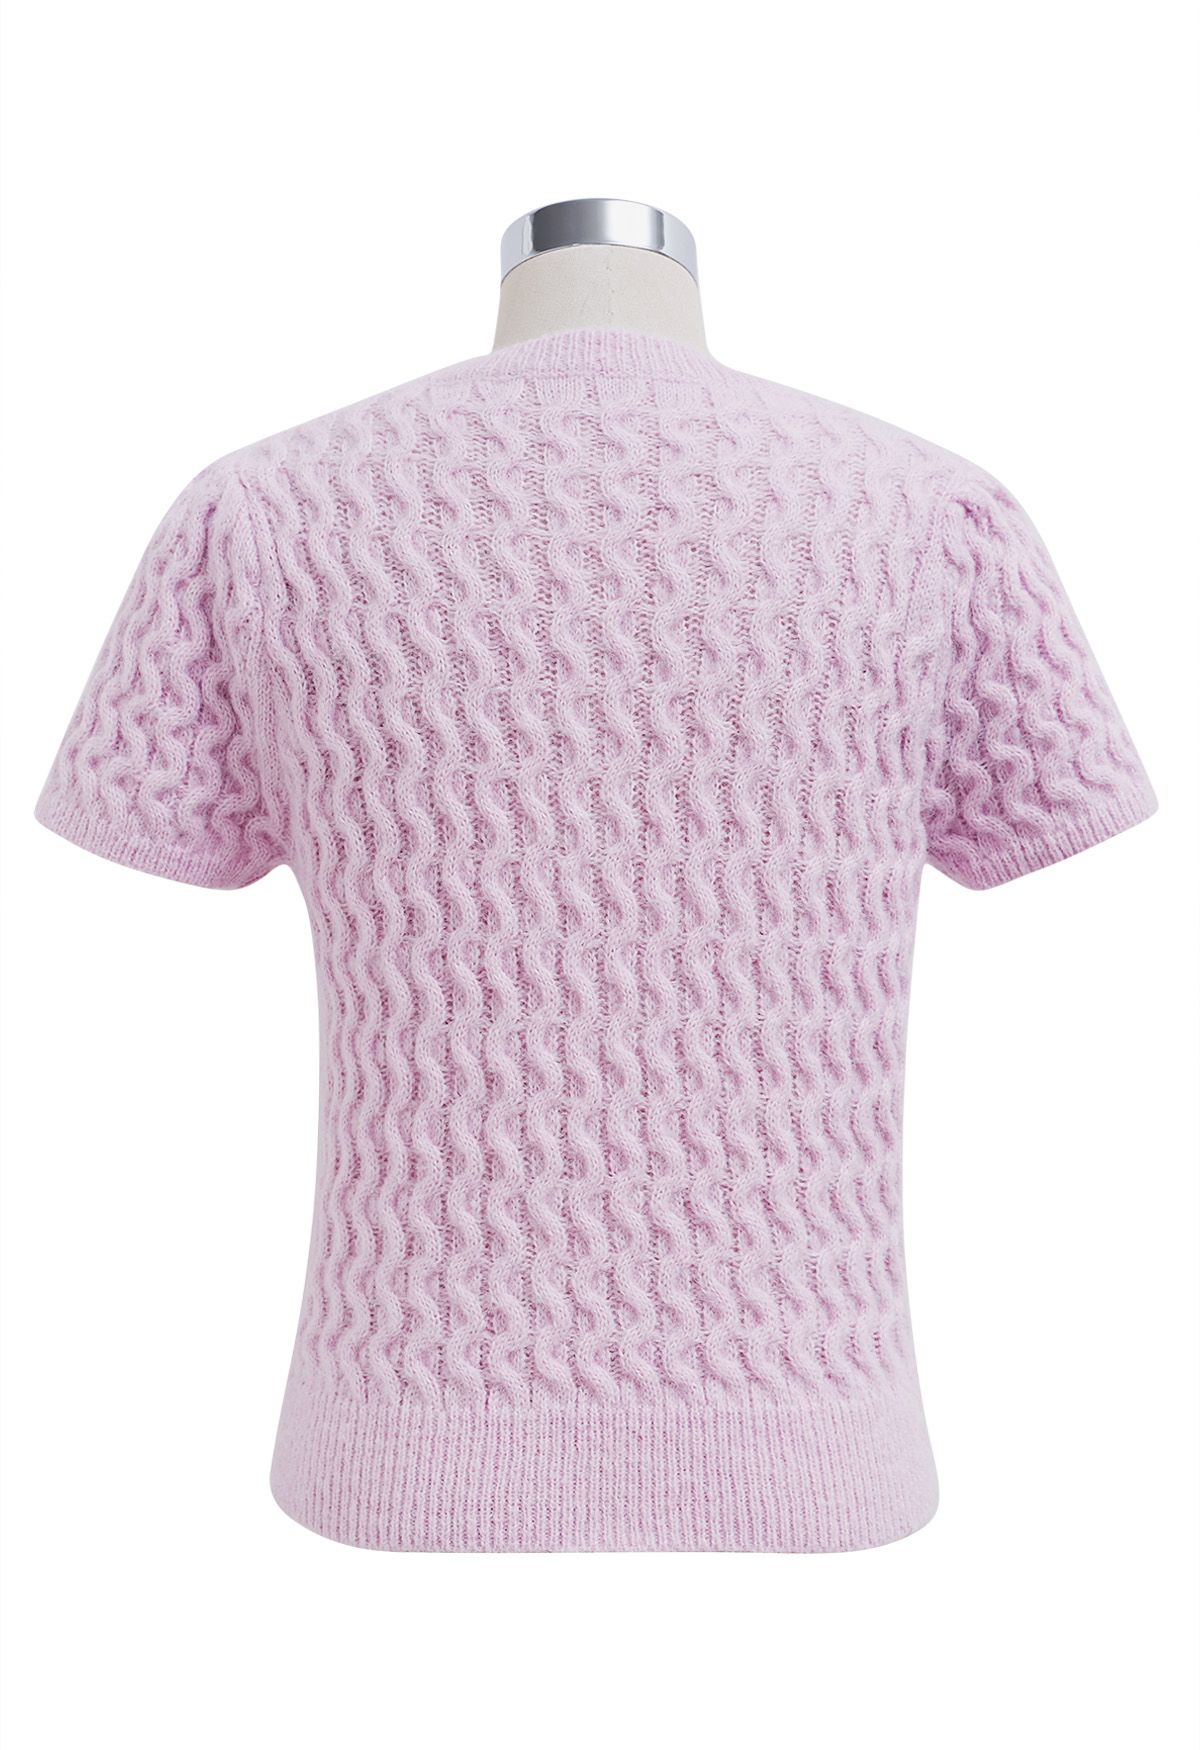 Endearing Bowknot Embellished Short Sleeve Knit Top in Lilac